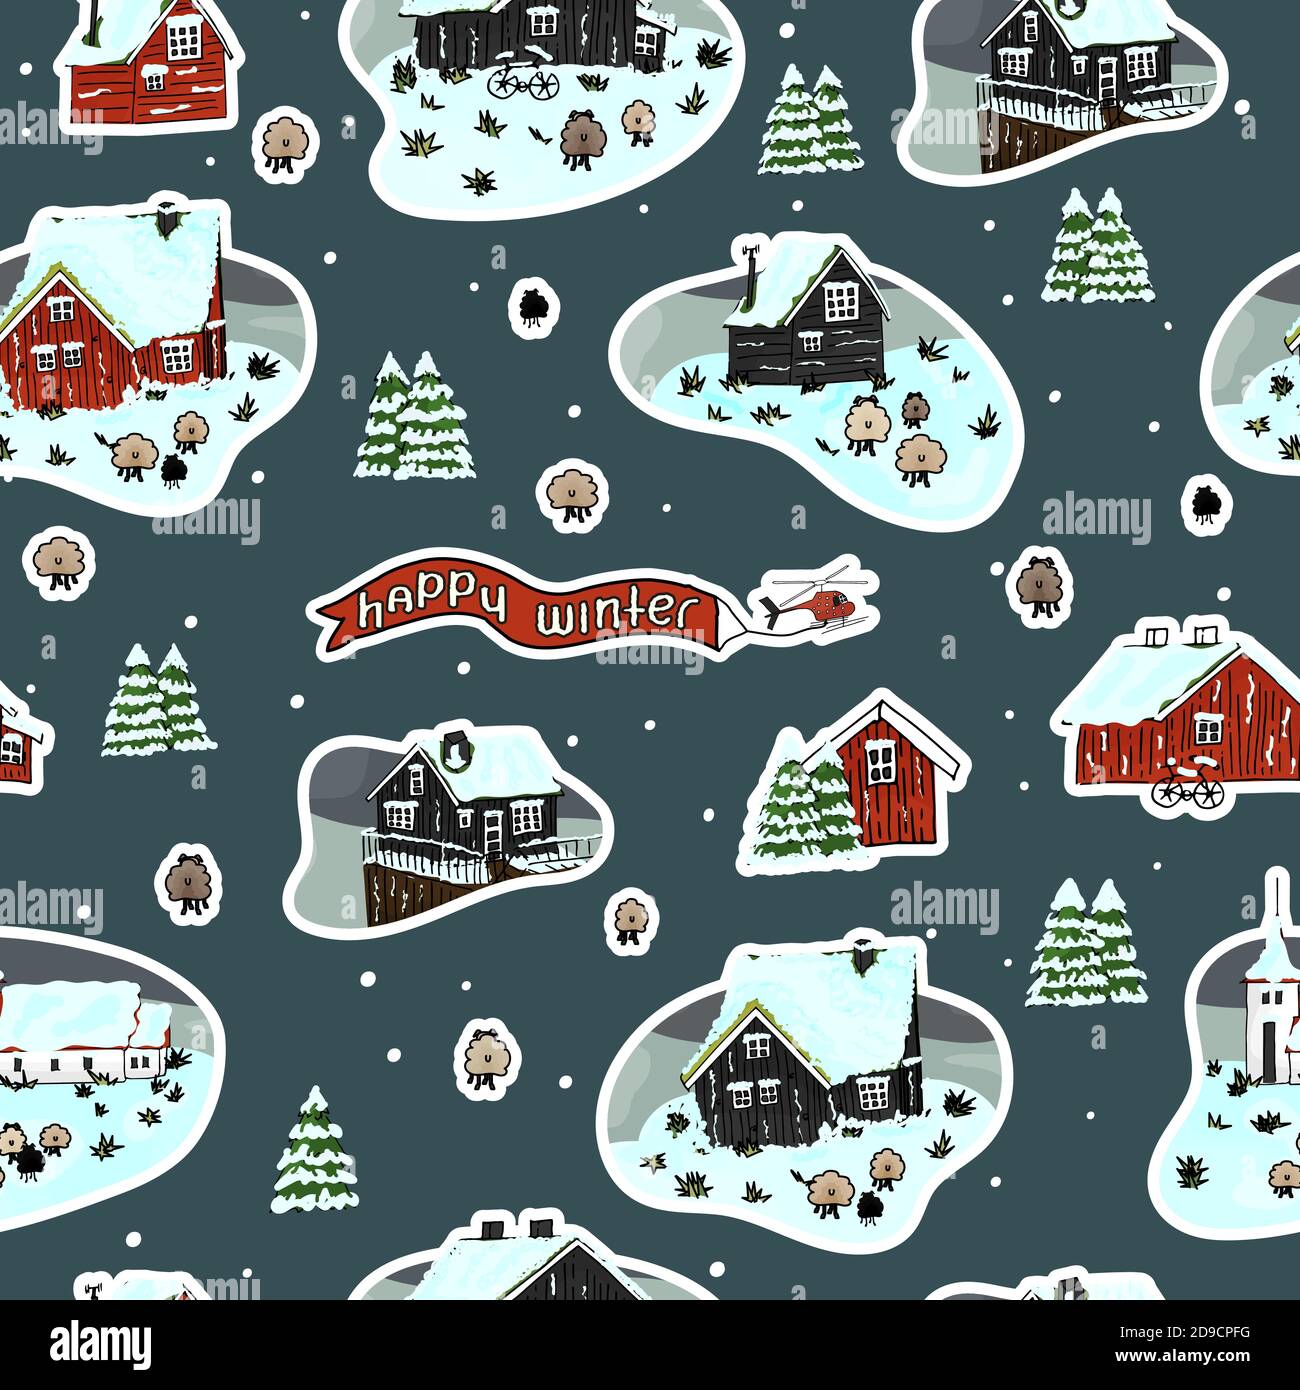 Seamless repeat pattern of snowy wooden scandinavian houses with grass on the roof, christmas trees, sheep and Happy winter text with helicopter Stock Vector